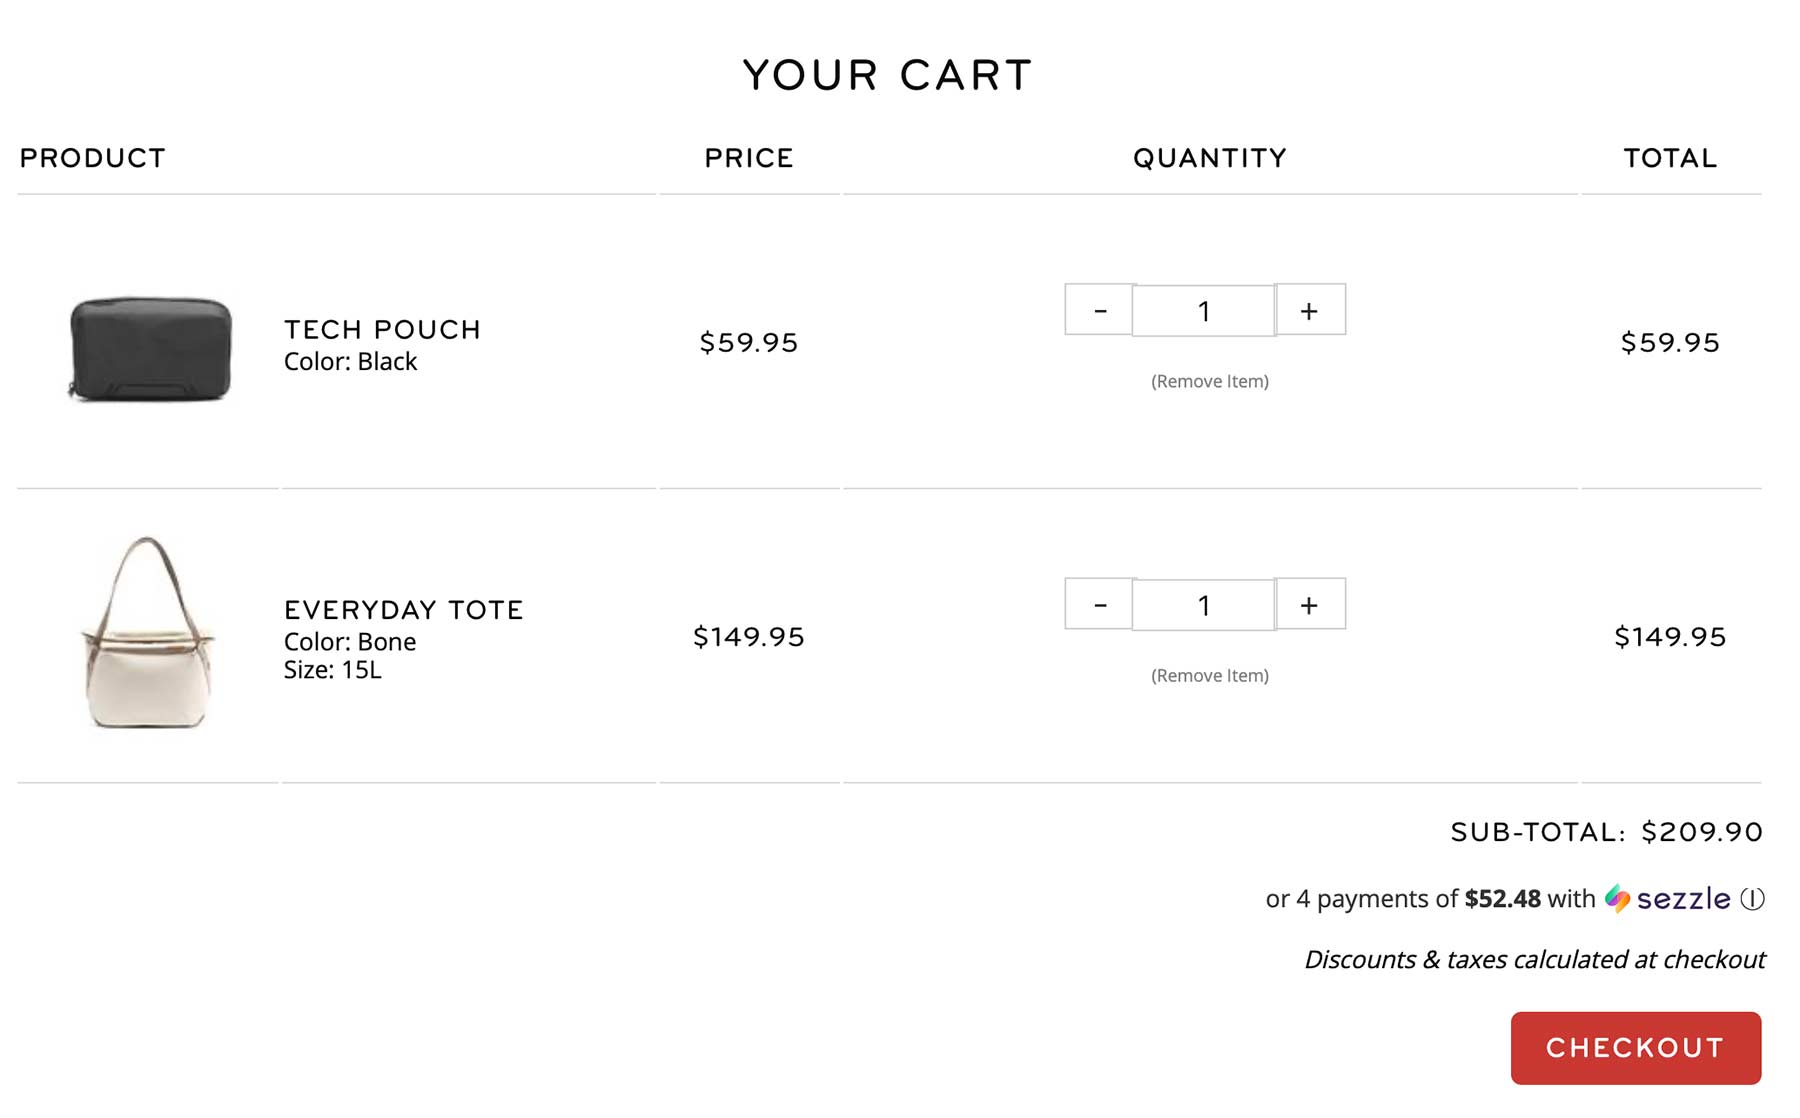 Shopping cart page displaying product photos and details